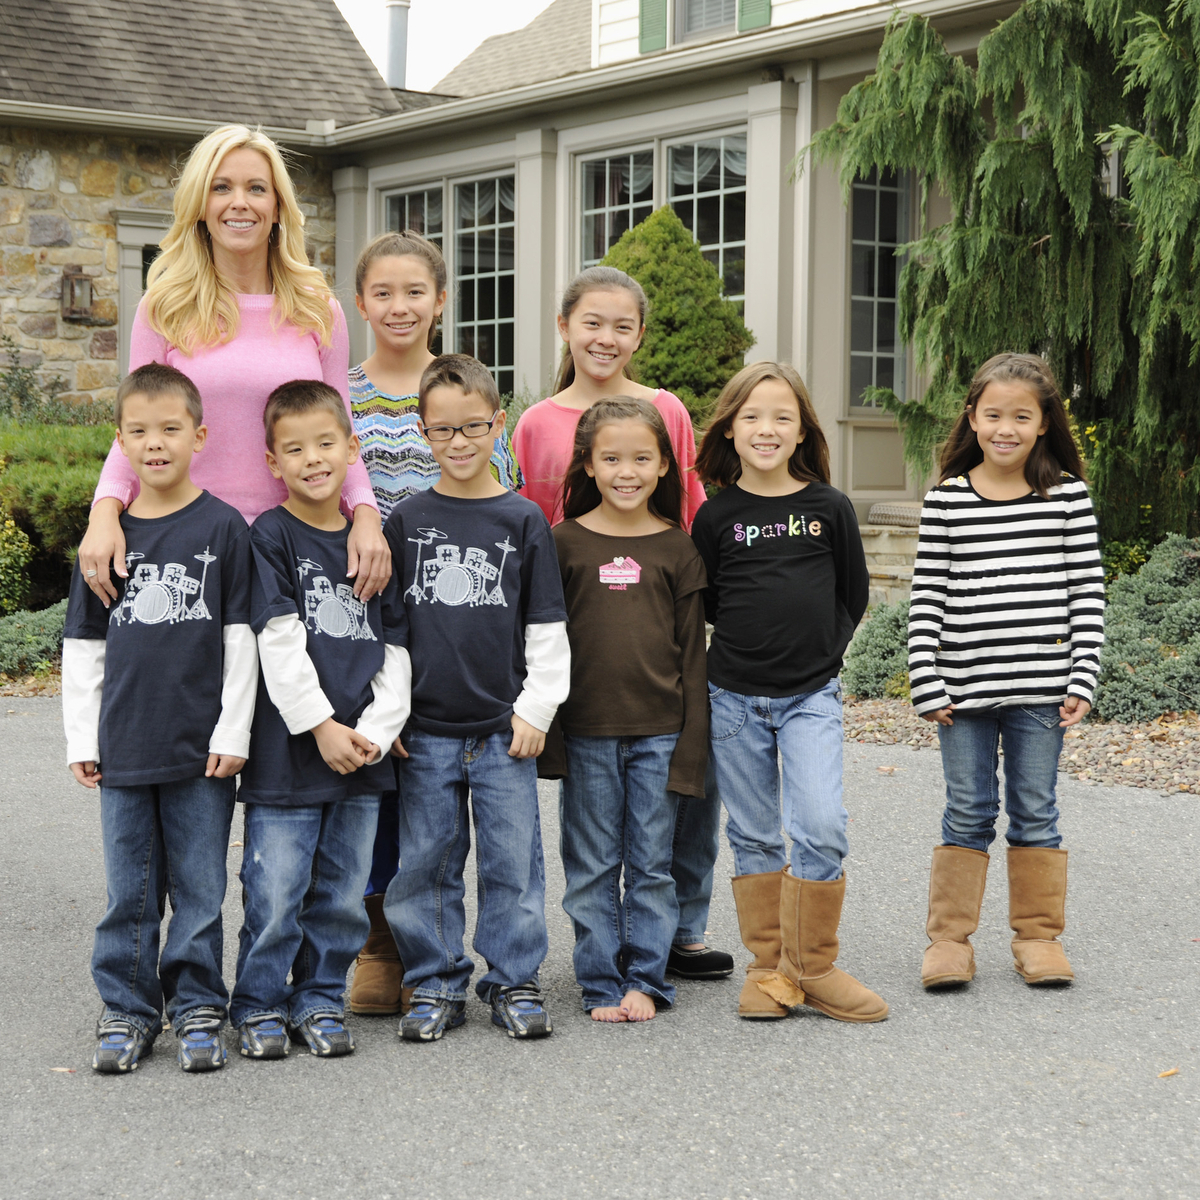 See How Jon & Kate Gosselin’s 8 Kids Have Grown Up Through the Years